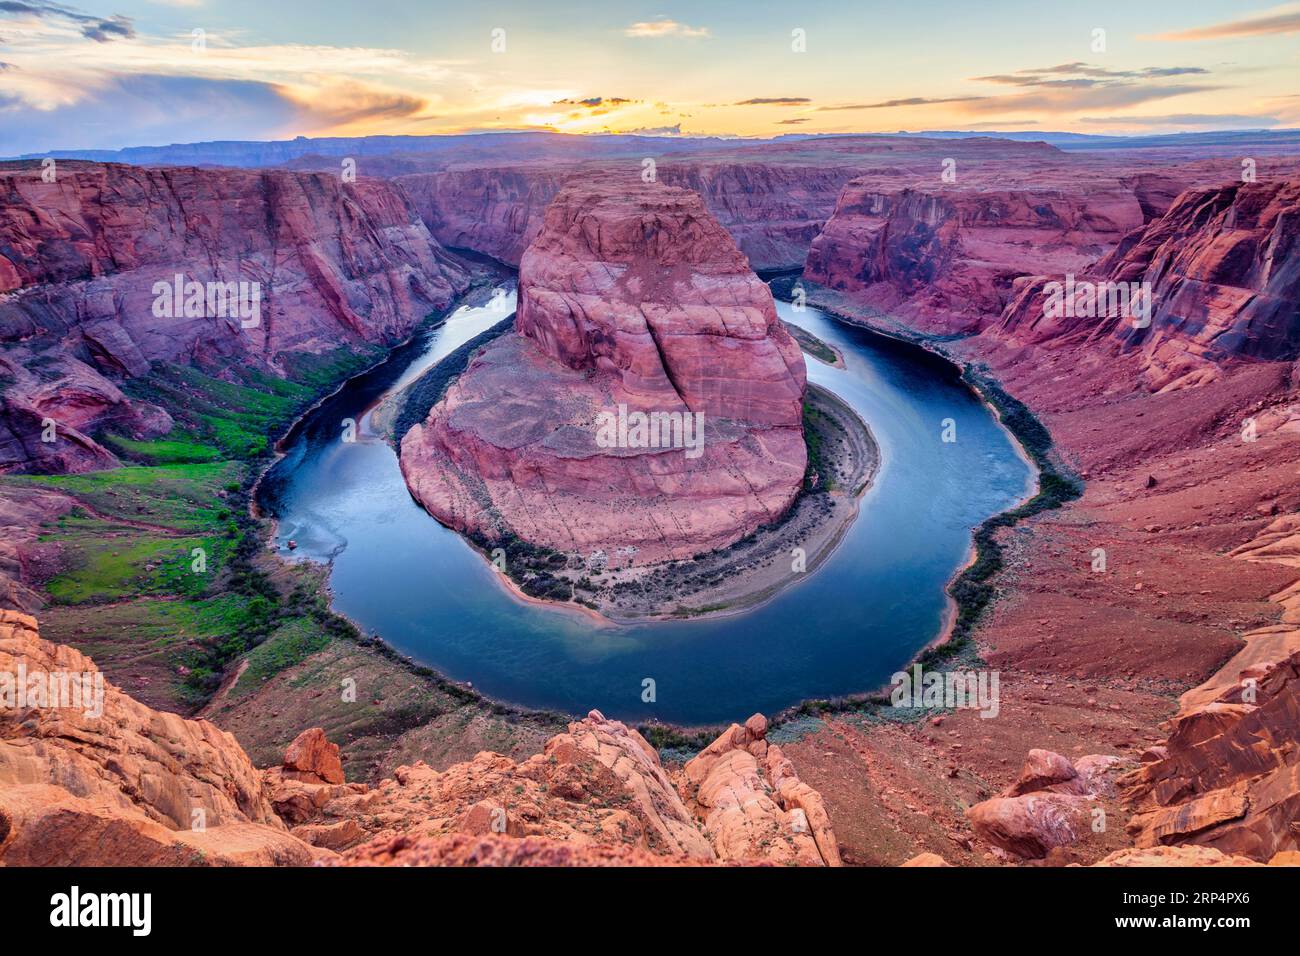 Horseshoe Bend, a meander of the Colorado River in the Glen Canyon area of Arizona, at sunset. Stock Photo